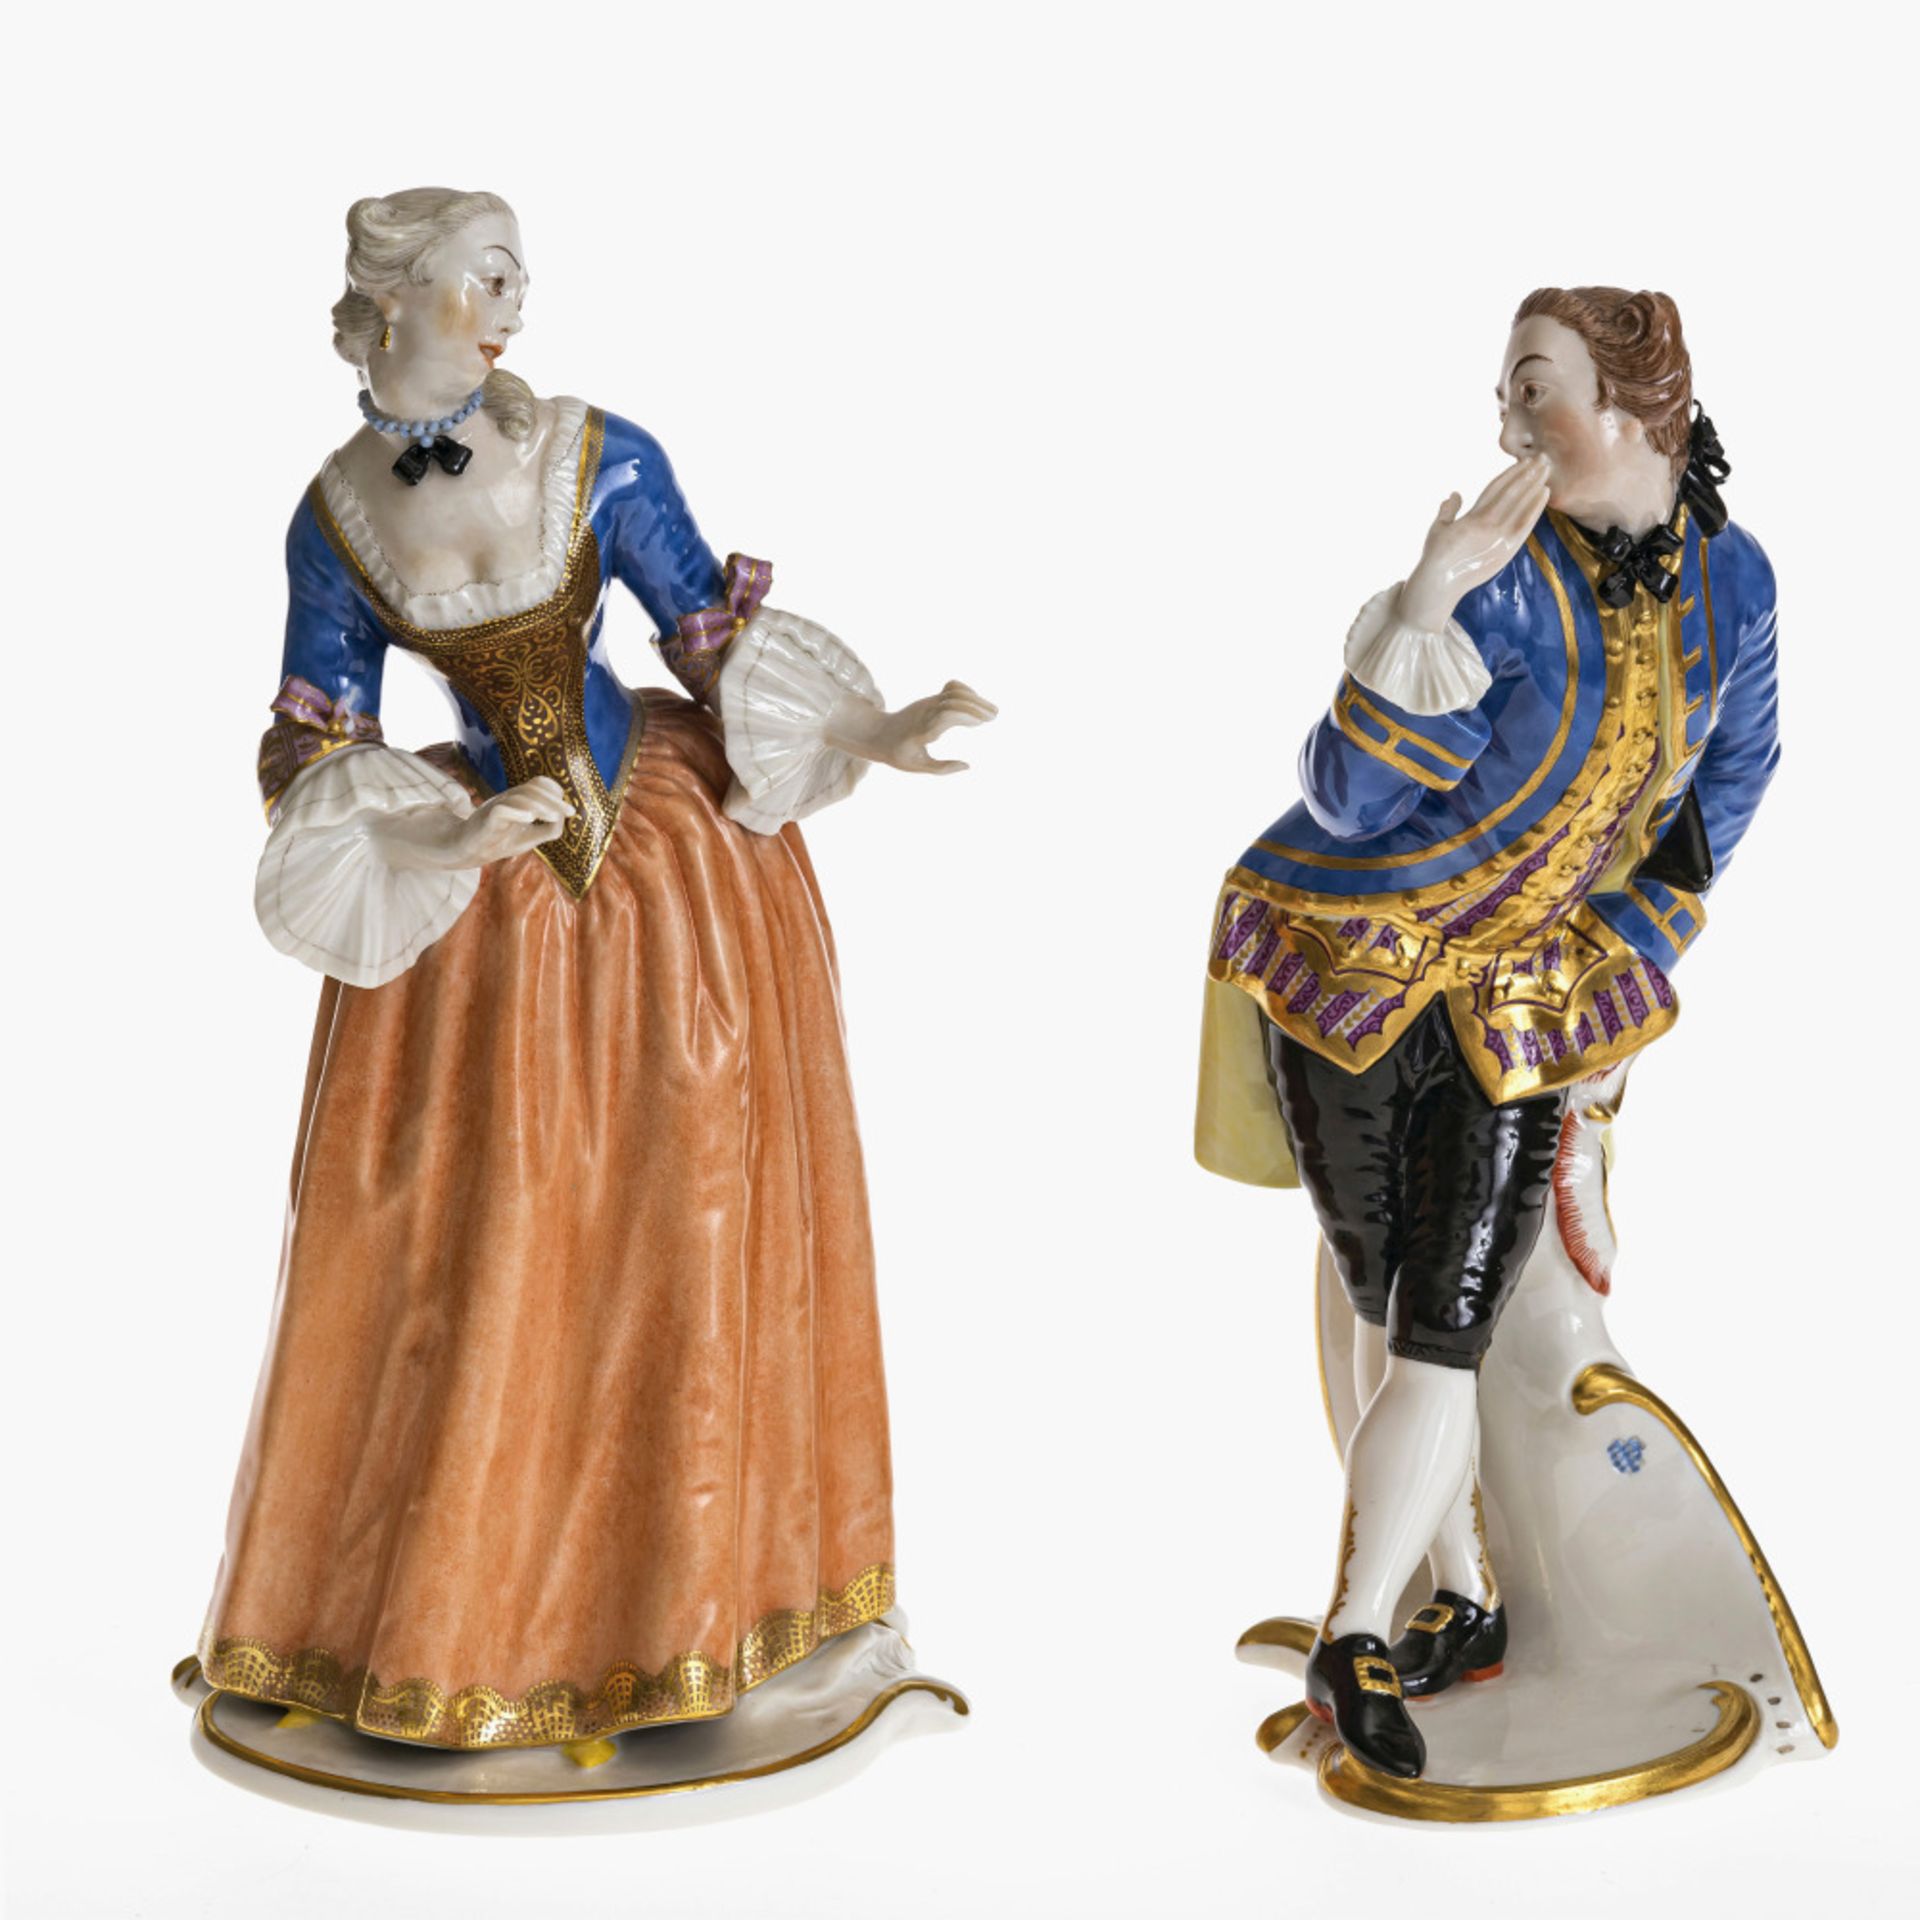 Isabella and Octavio, two figures from the Commedia dellArte - Nymphenburg, after the model by F. A.